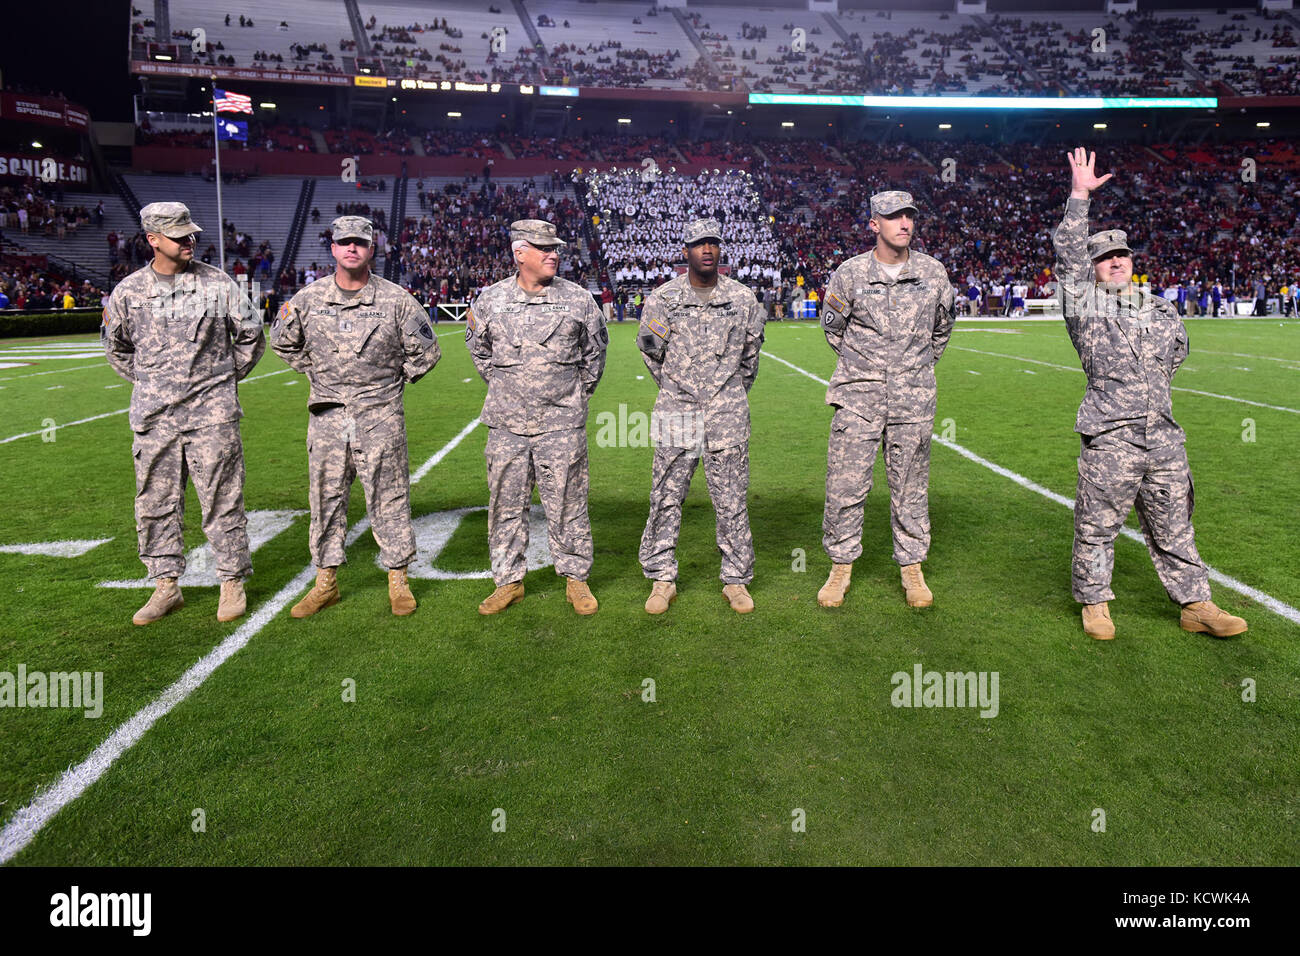 U.S. Army 1st Lt. Lucien Lapierre, South Carolina National Guard, 1-151st Attack Reconnaissance Battalion UH-64 Apache pilot, receives  recognition at Williams-Brice stadium in Columbia, South Carolina, Nov. 19, 2016. The South Carolina Army National Guard conducted a fly-over in support of Fort Jackson's participation in the University of South Carolina's military appreciation game. (U.S. Air National Guard photo by Airman 1st Class Megan Floyd) Stock Photo